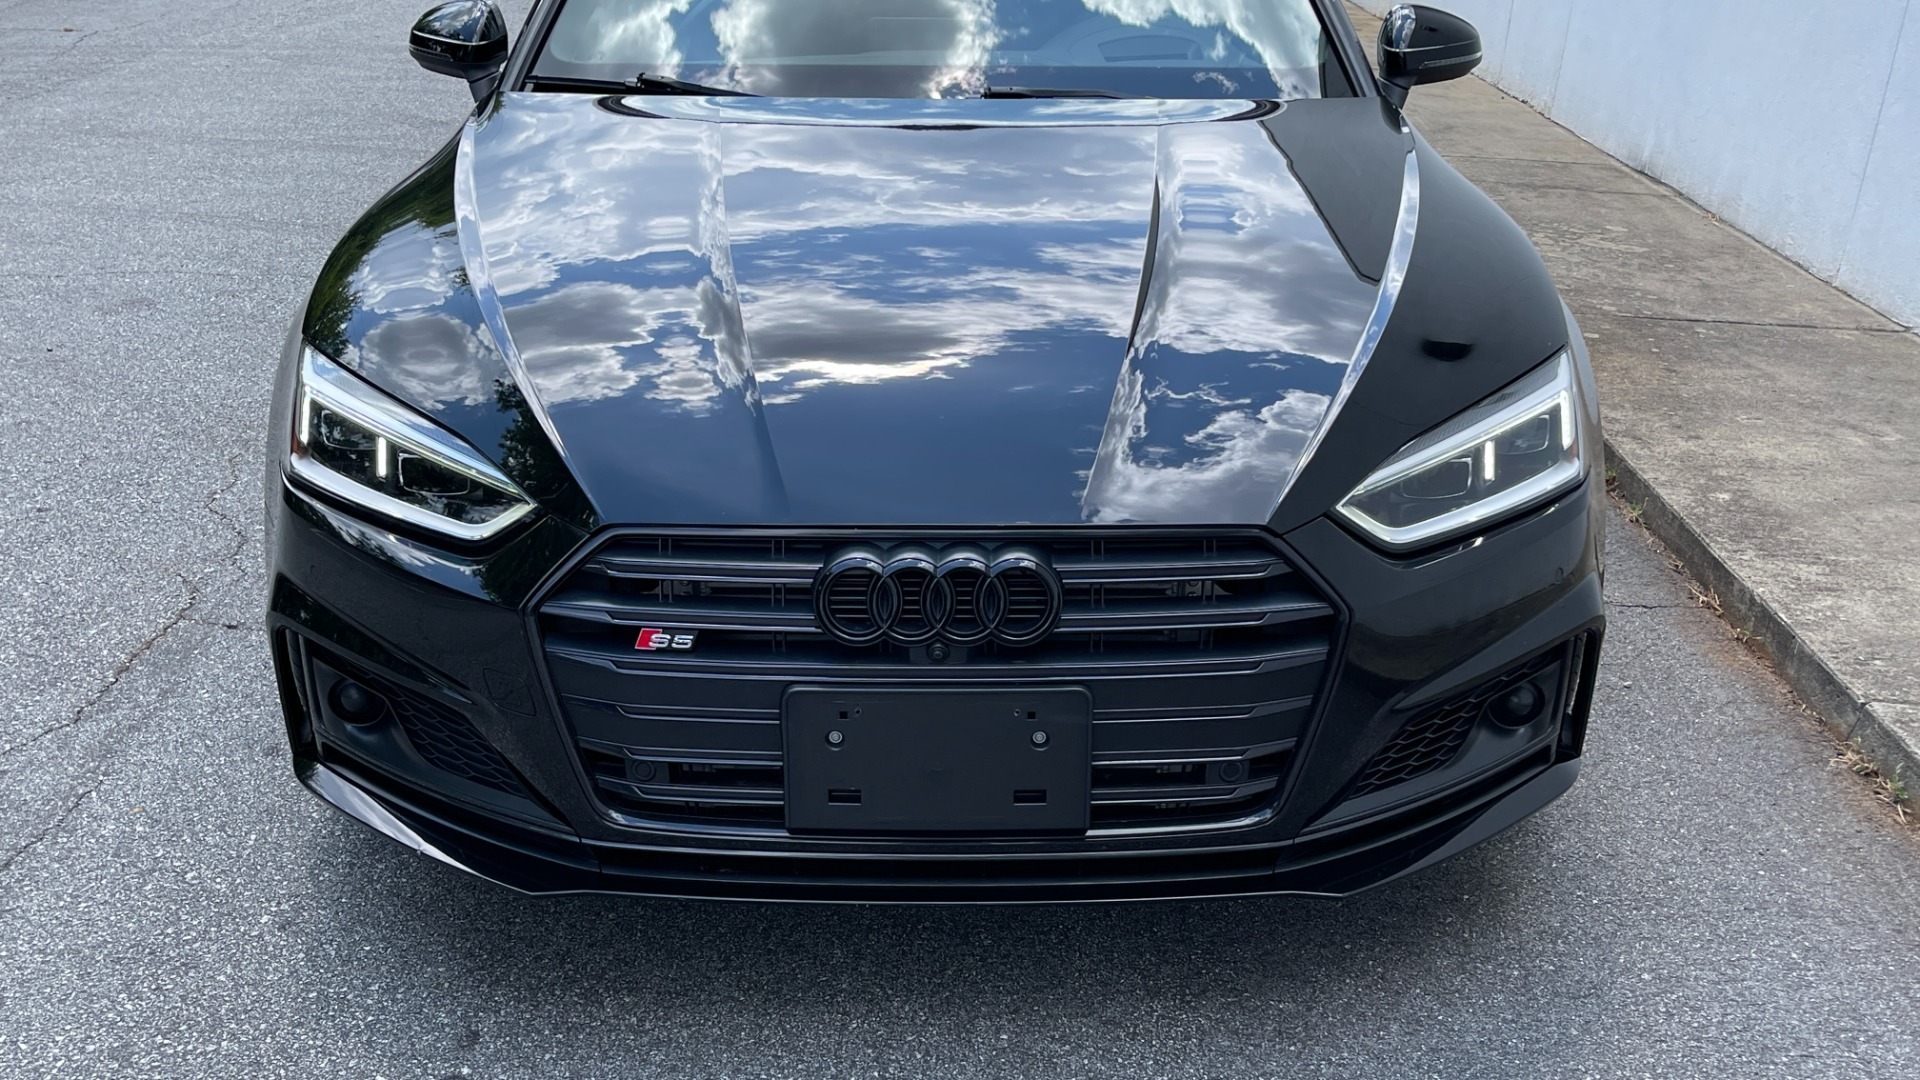 Used 2019 Audi S5 Sportback Prestige / BC FORGED WHEELS / APR INTAKE / APR EXHAUST / CARBON FIBER for sale $51,595 at Formula Imports in Charlotte NC 28227 7